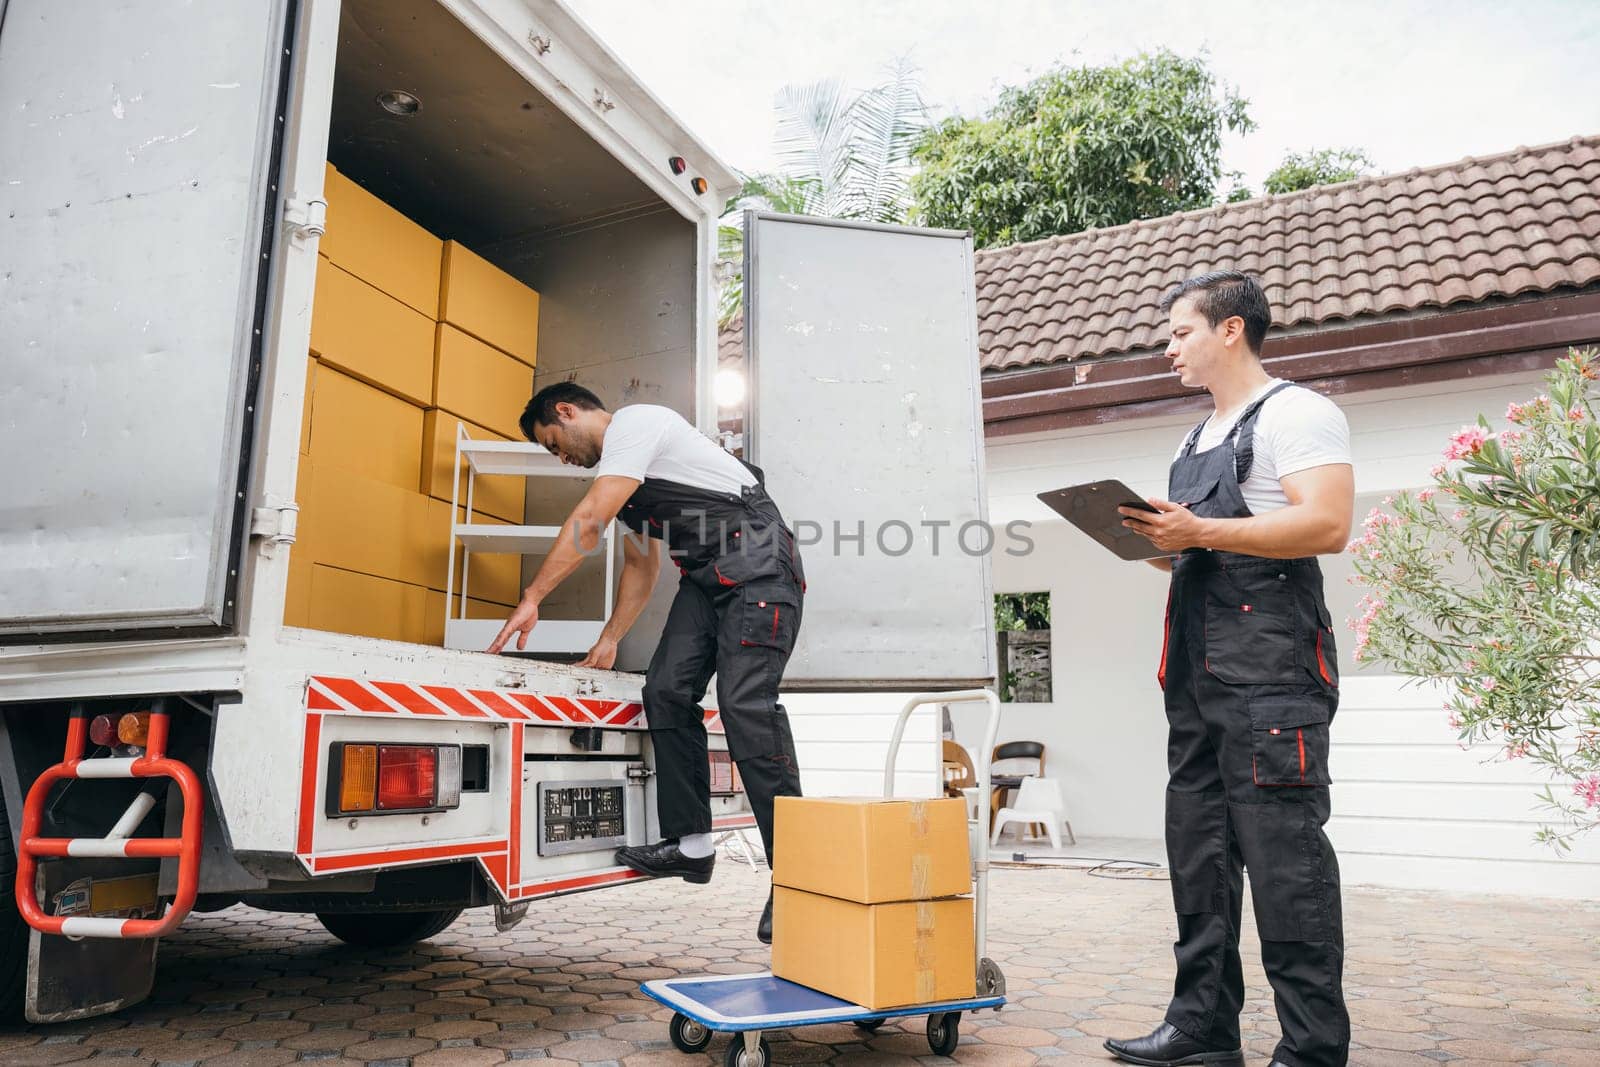 Two employees of a removal company work together unloading furniture and boxes from the truck ensuring an efficient delivery into the new family home. Their teamwork delivers happiness. Moving Day